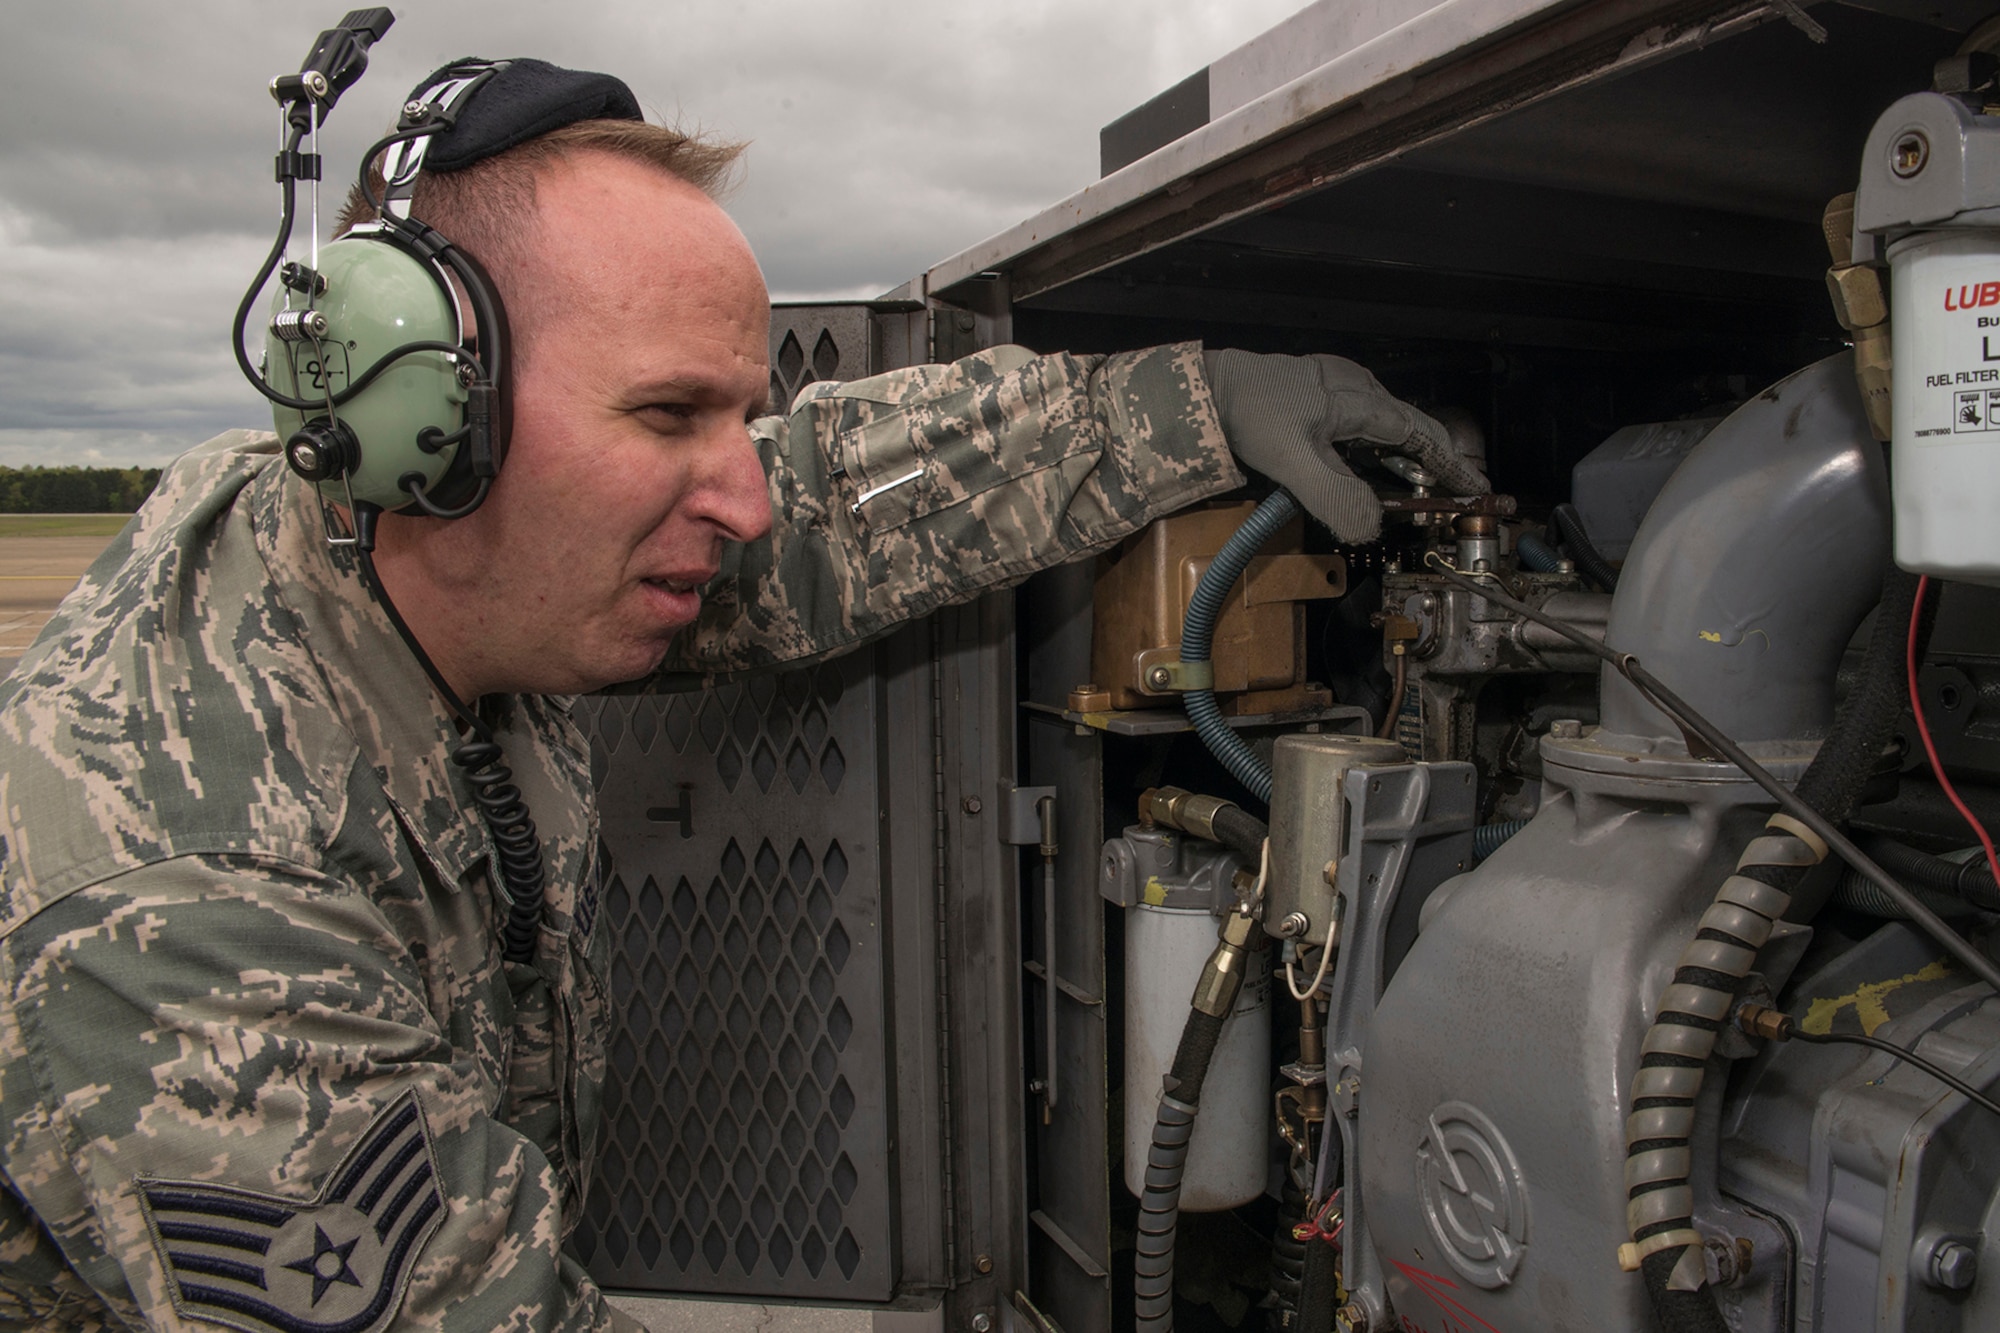 U.S. Air Force Reserve Staff Sgt. Jason C. Britten, an aerospace ground equipment (AGE) apprentice assigned to the 913th Maintenance Squadron, adjusts the throttle on a diesel generator April 5, 2017, at Little Rock Air Force Base, Ark. Britten was recently awarded the prestigious ACE Award March 20, 2017, while training at Sheppard AFB, Texas. Aerospace Ground Equipment specialists are responsible for maintaining and repairing the equipment that supplies electricity, hydraulic pressure and air pressure to Air Force planes. (U.S. Air Force photo by Master Sgt. Jeff Walston/Released)